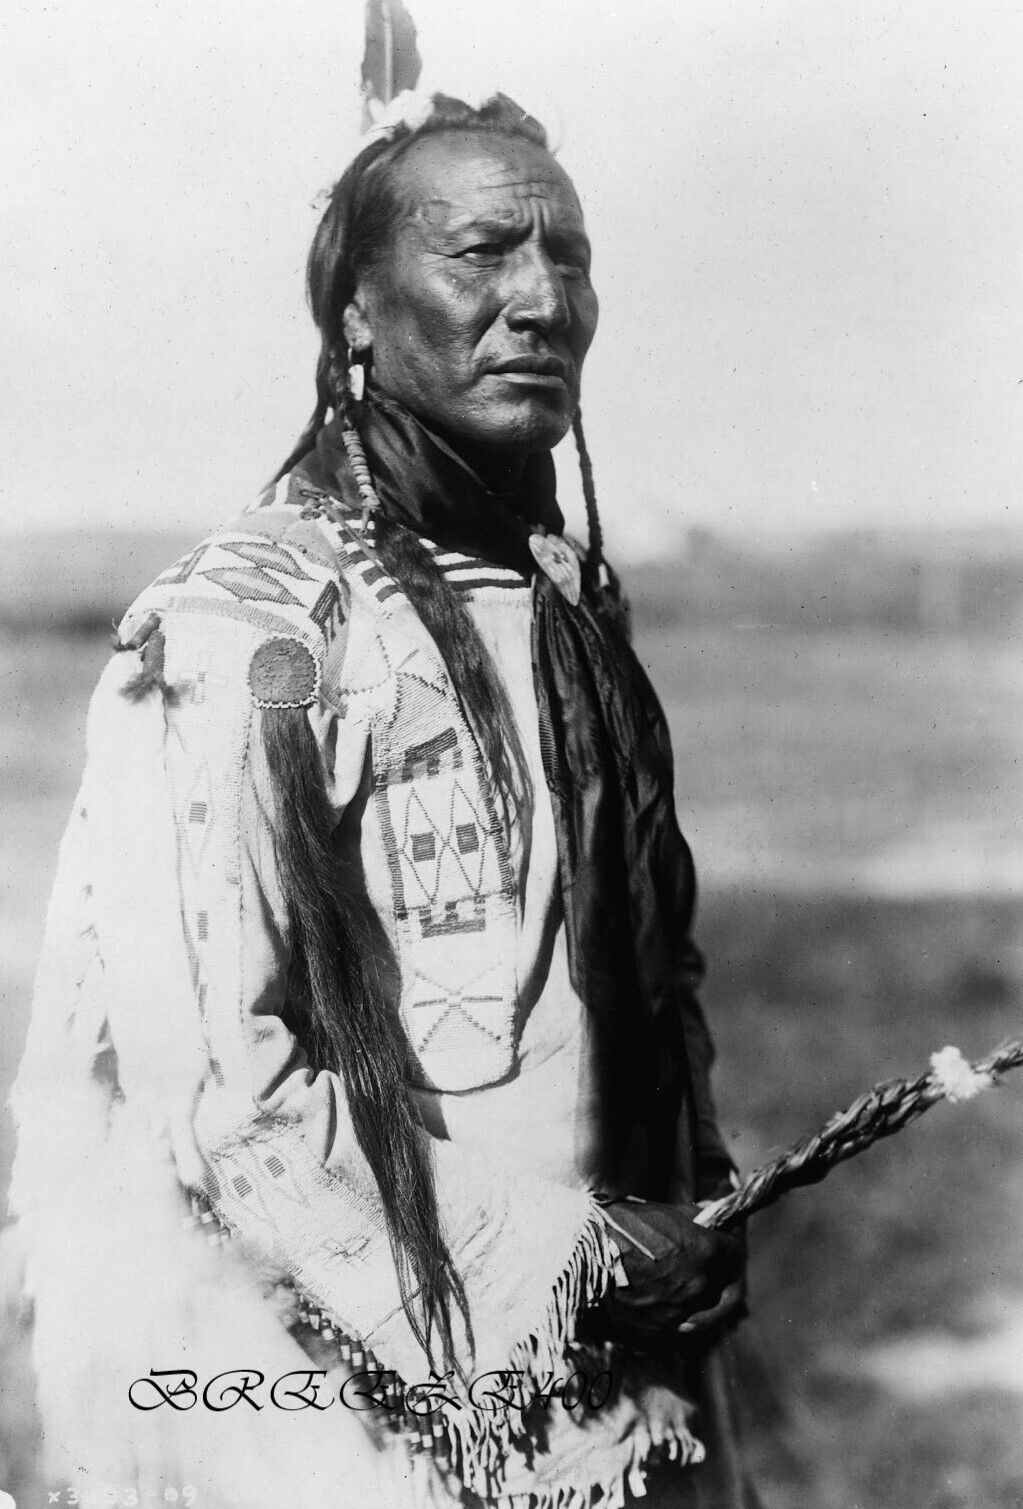 Vintage Photo Reprint/BLACKFOOT CHIEF-BIG MOUTH SPRING/Date Unknwn/4x6 B&W Photo